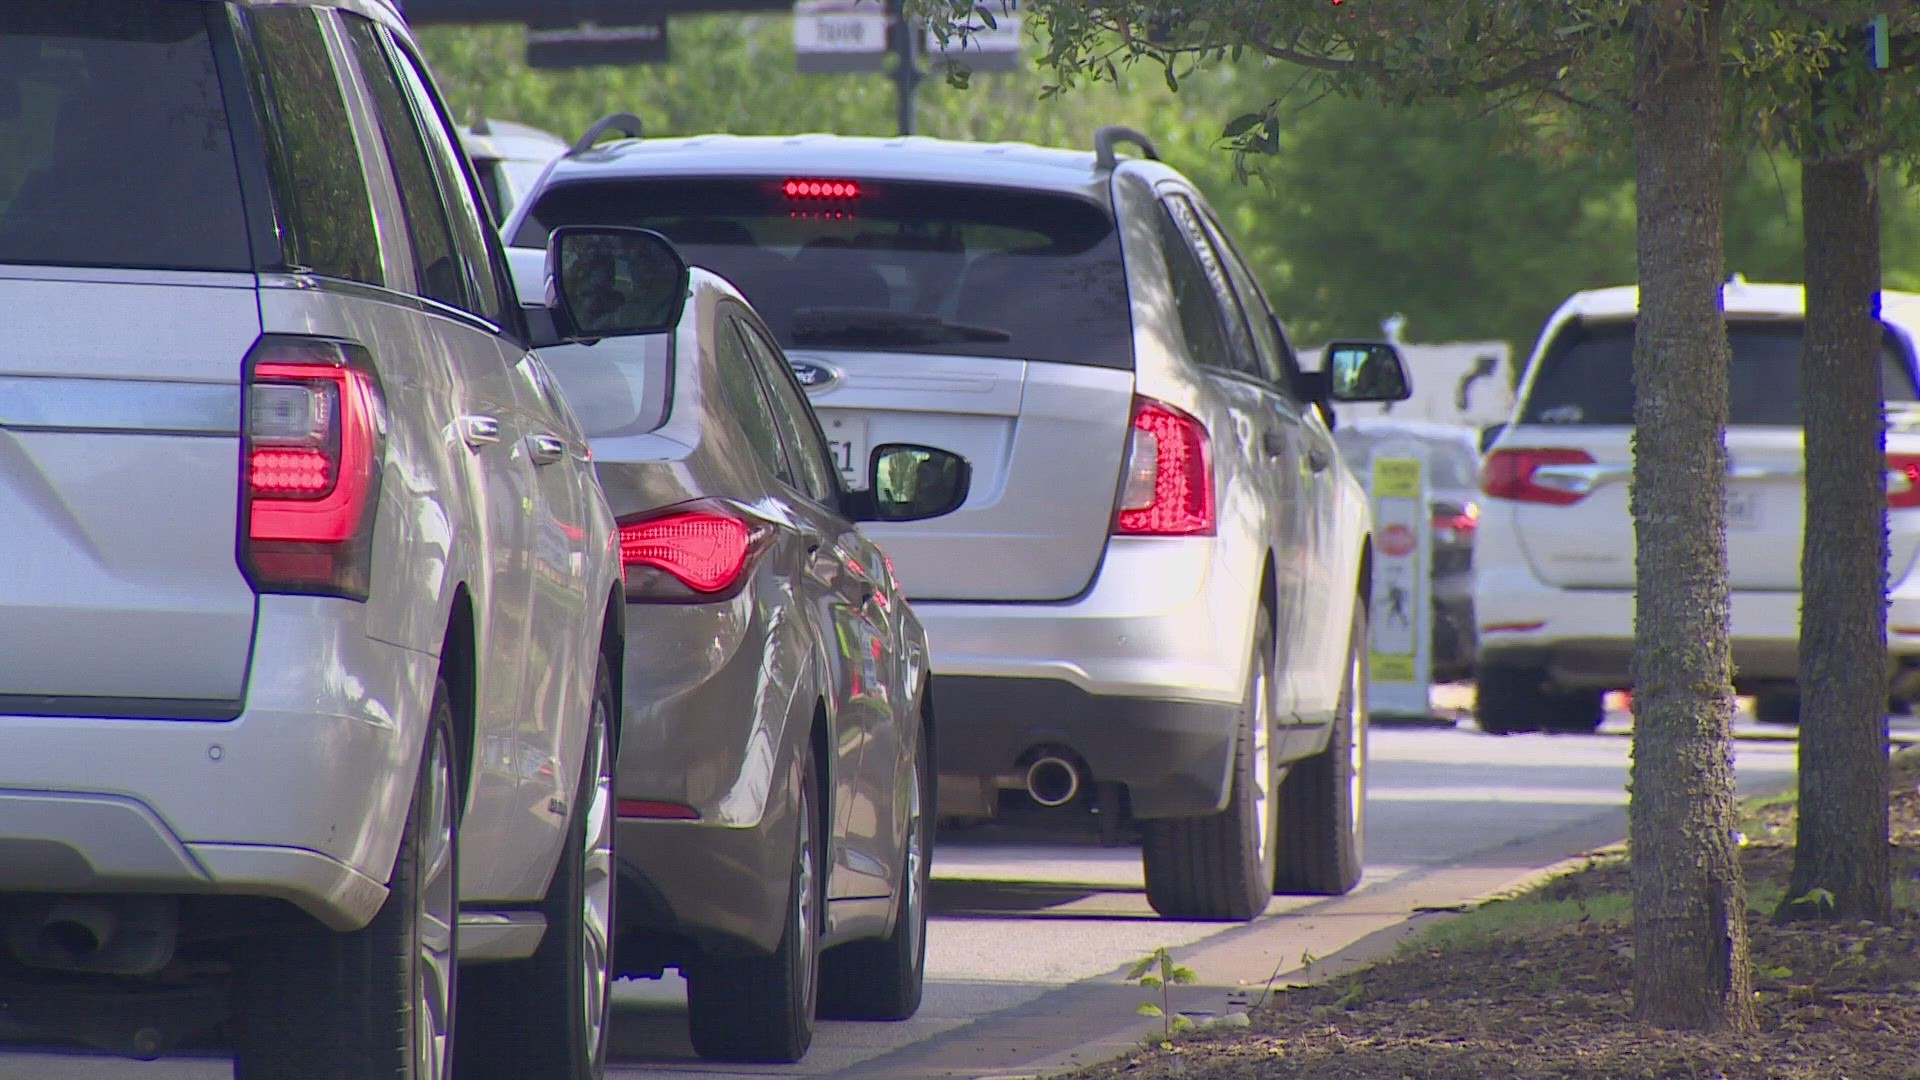 After a busy weekend of entertainment in Arlington, how did traffic hold up?